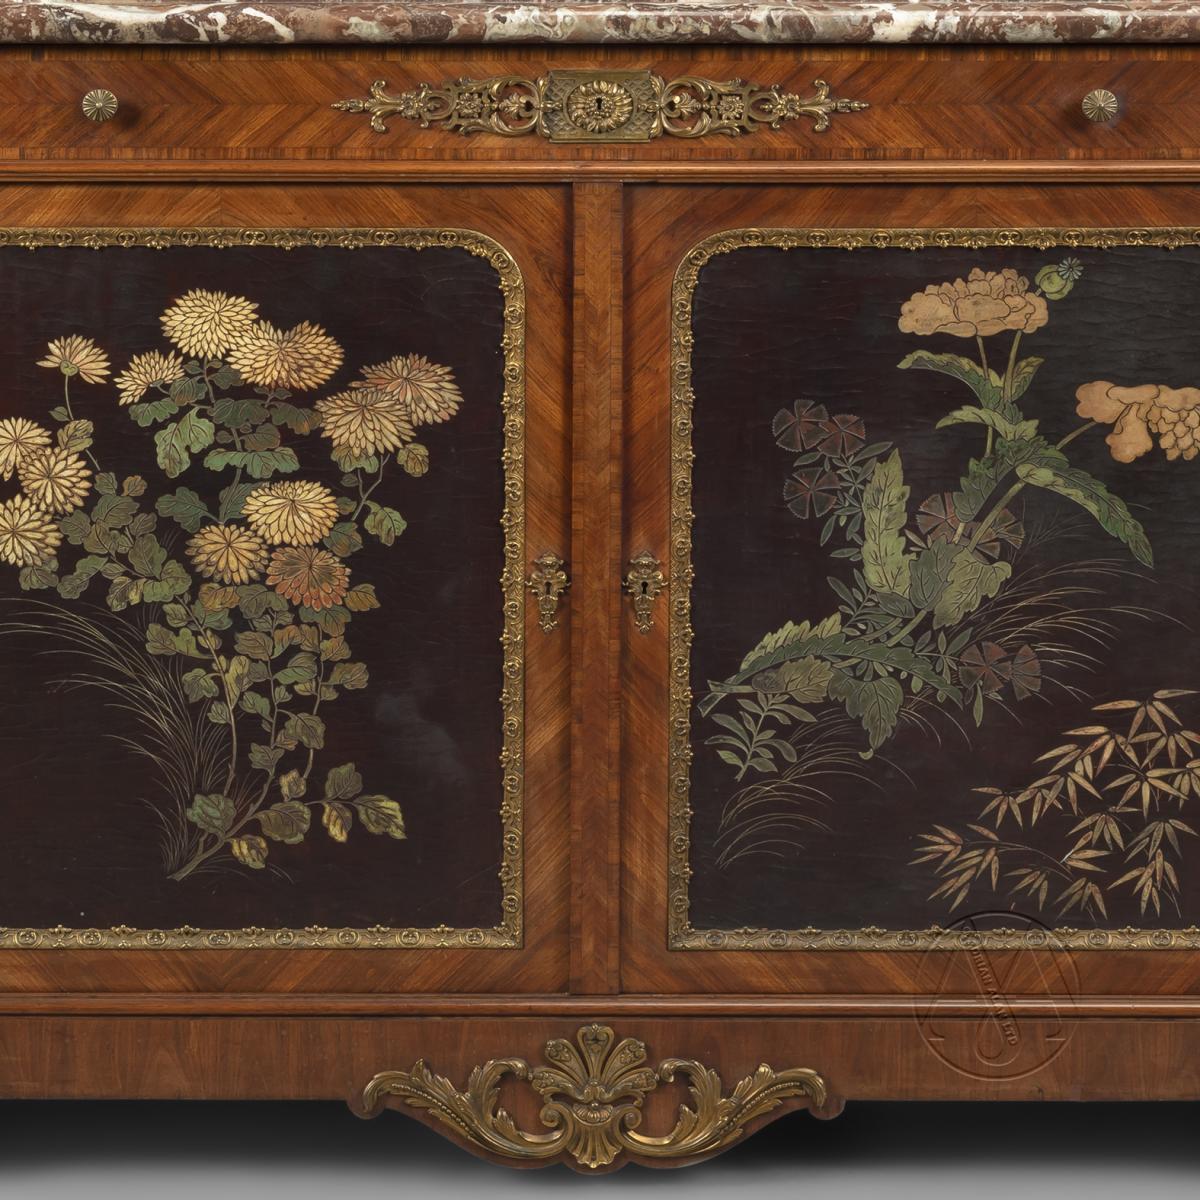 A Superb Régence Style Gilt-Bronze Mounted Side Cabinet  With Lacquer Panels, Firmly Attributed to Sormani